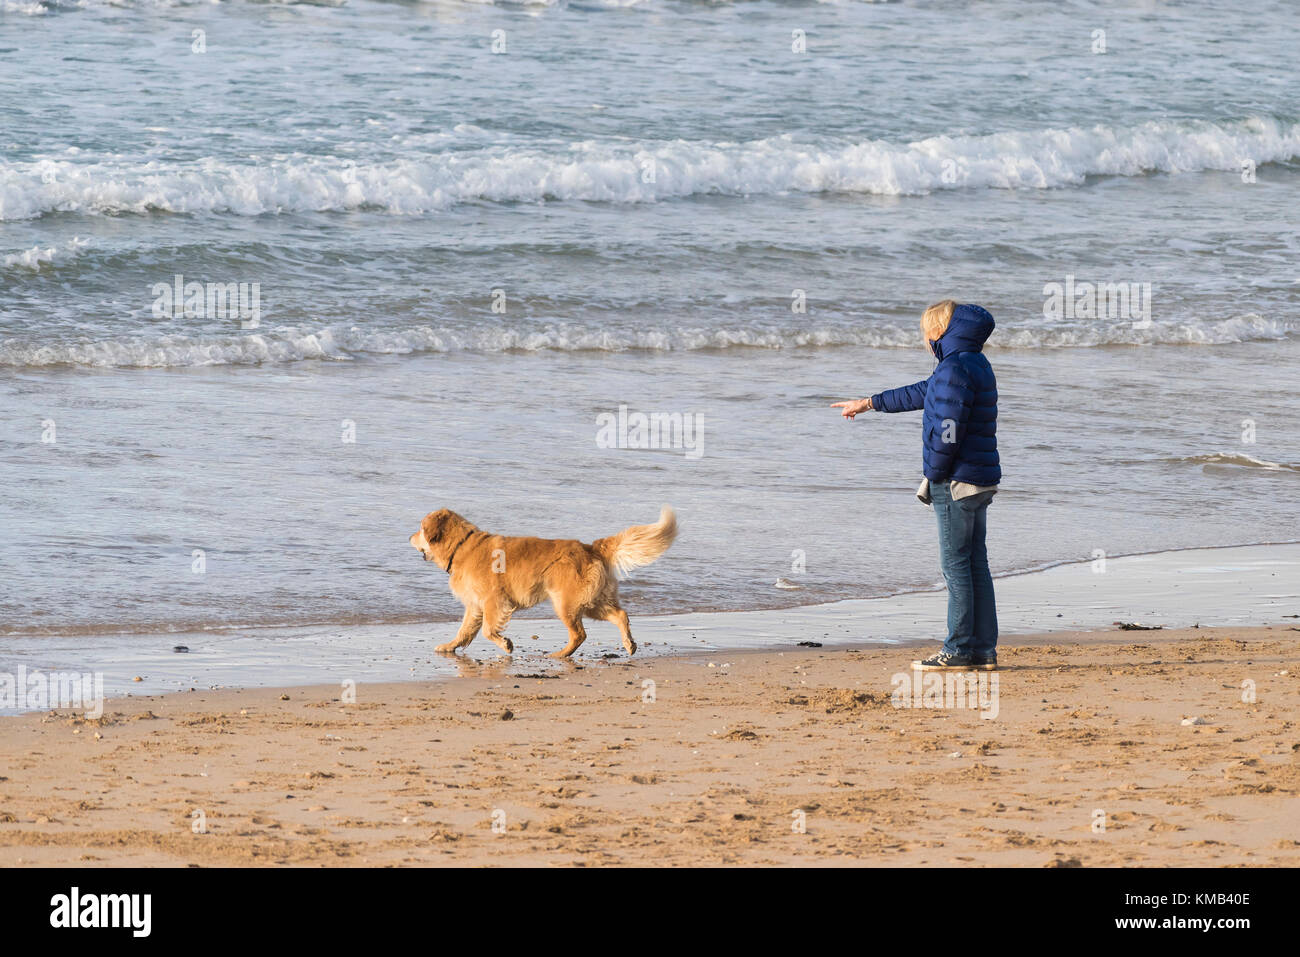 Dog owner - a woman and her dog on Fistral Beach Newquay Cornwall UK. Stock Photo